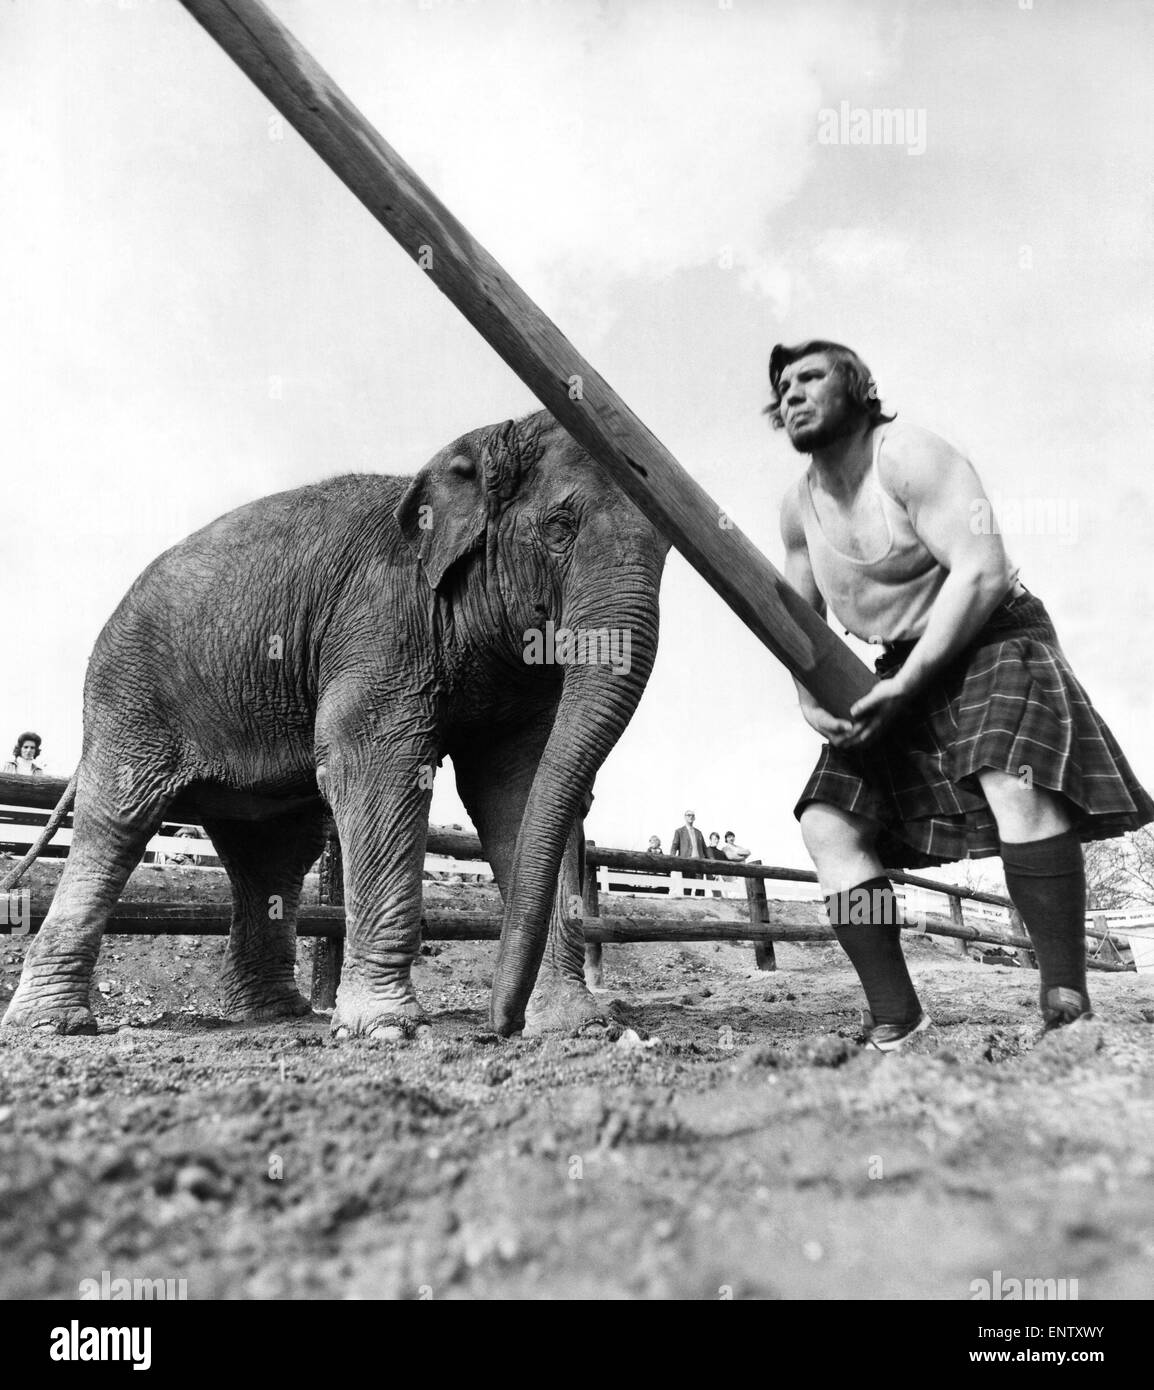 Man Tossing the caber with Tania the elephant watching: on 20th May 1973 Stock Photo